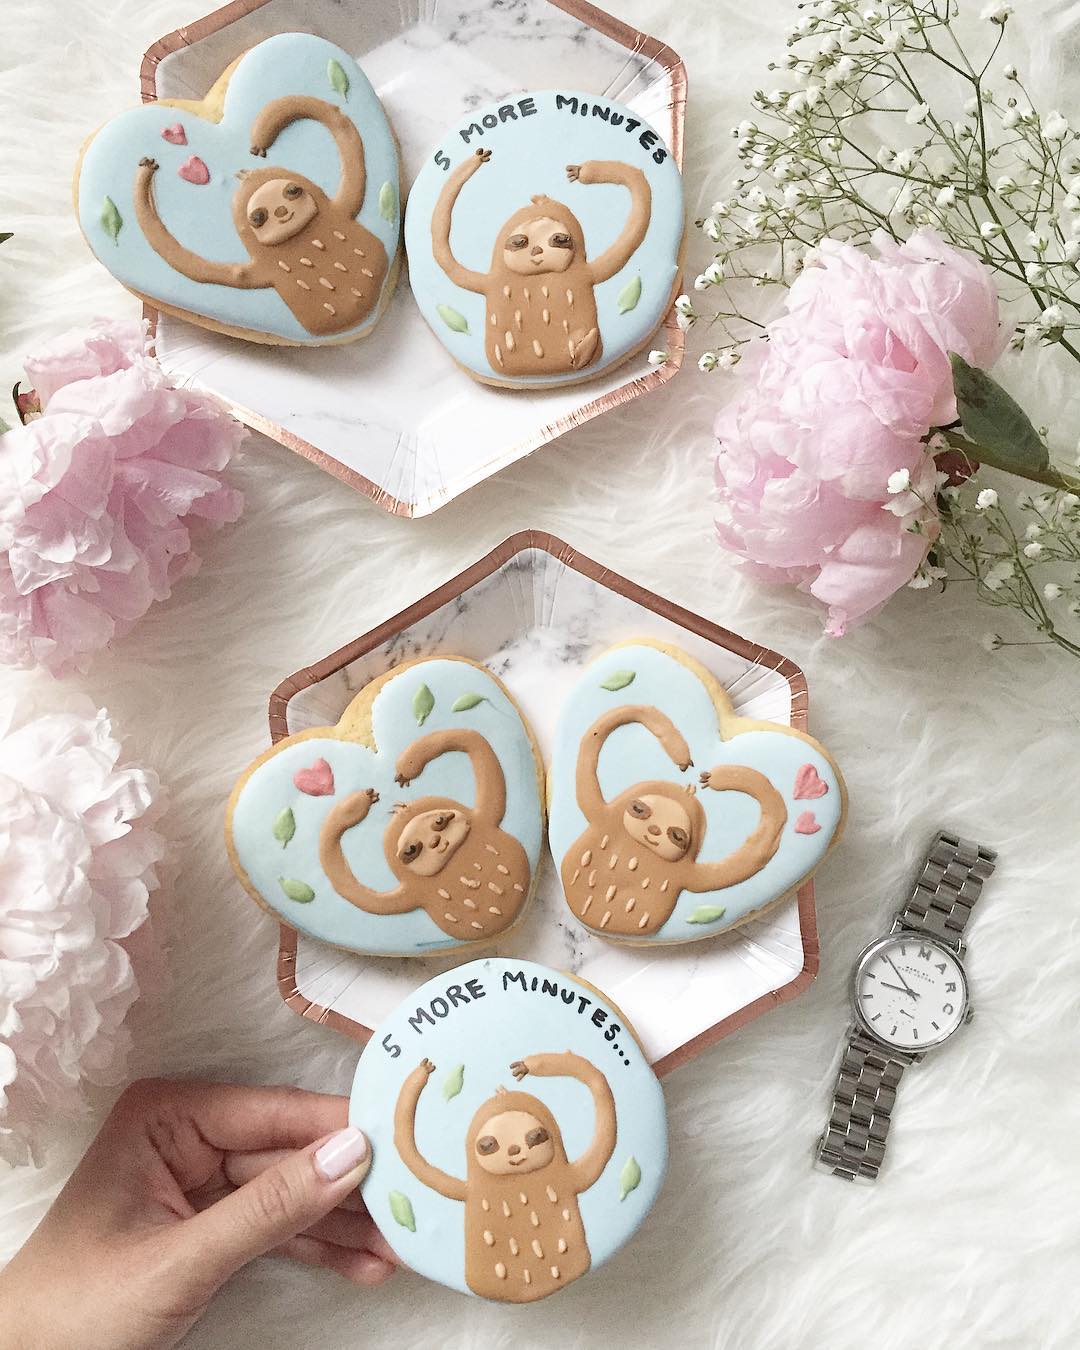 50+ Sloth Crafts, Printables, SVG's, DIY's, Food and Gift Ideas: Sloth Cookies from Burberrie Jam on Instagram